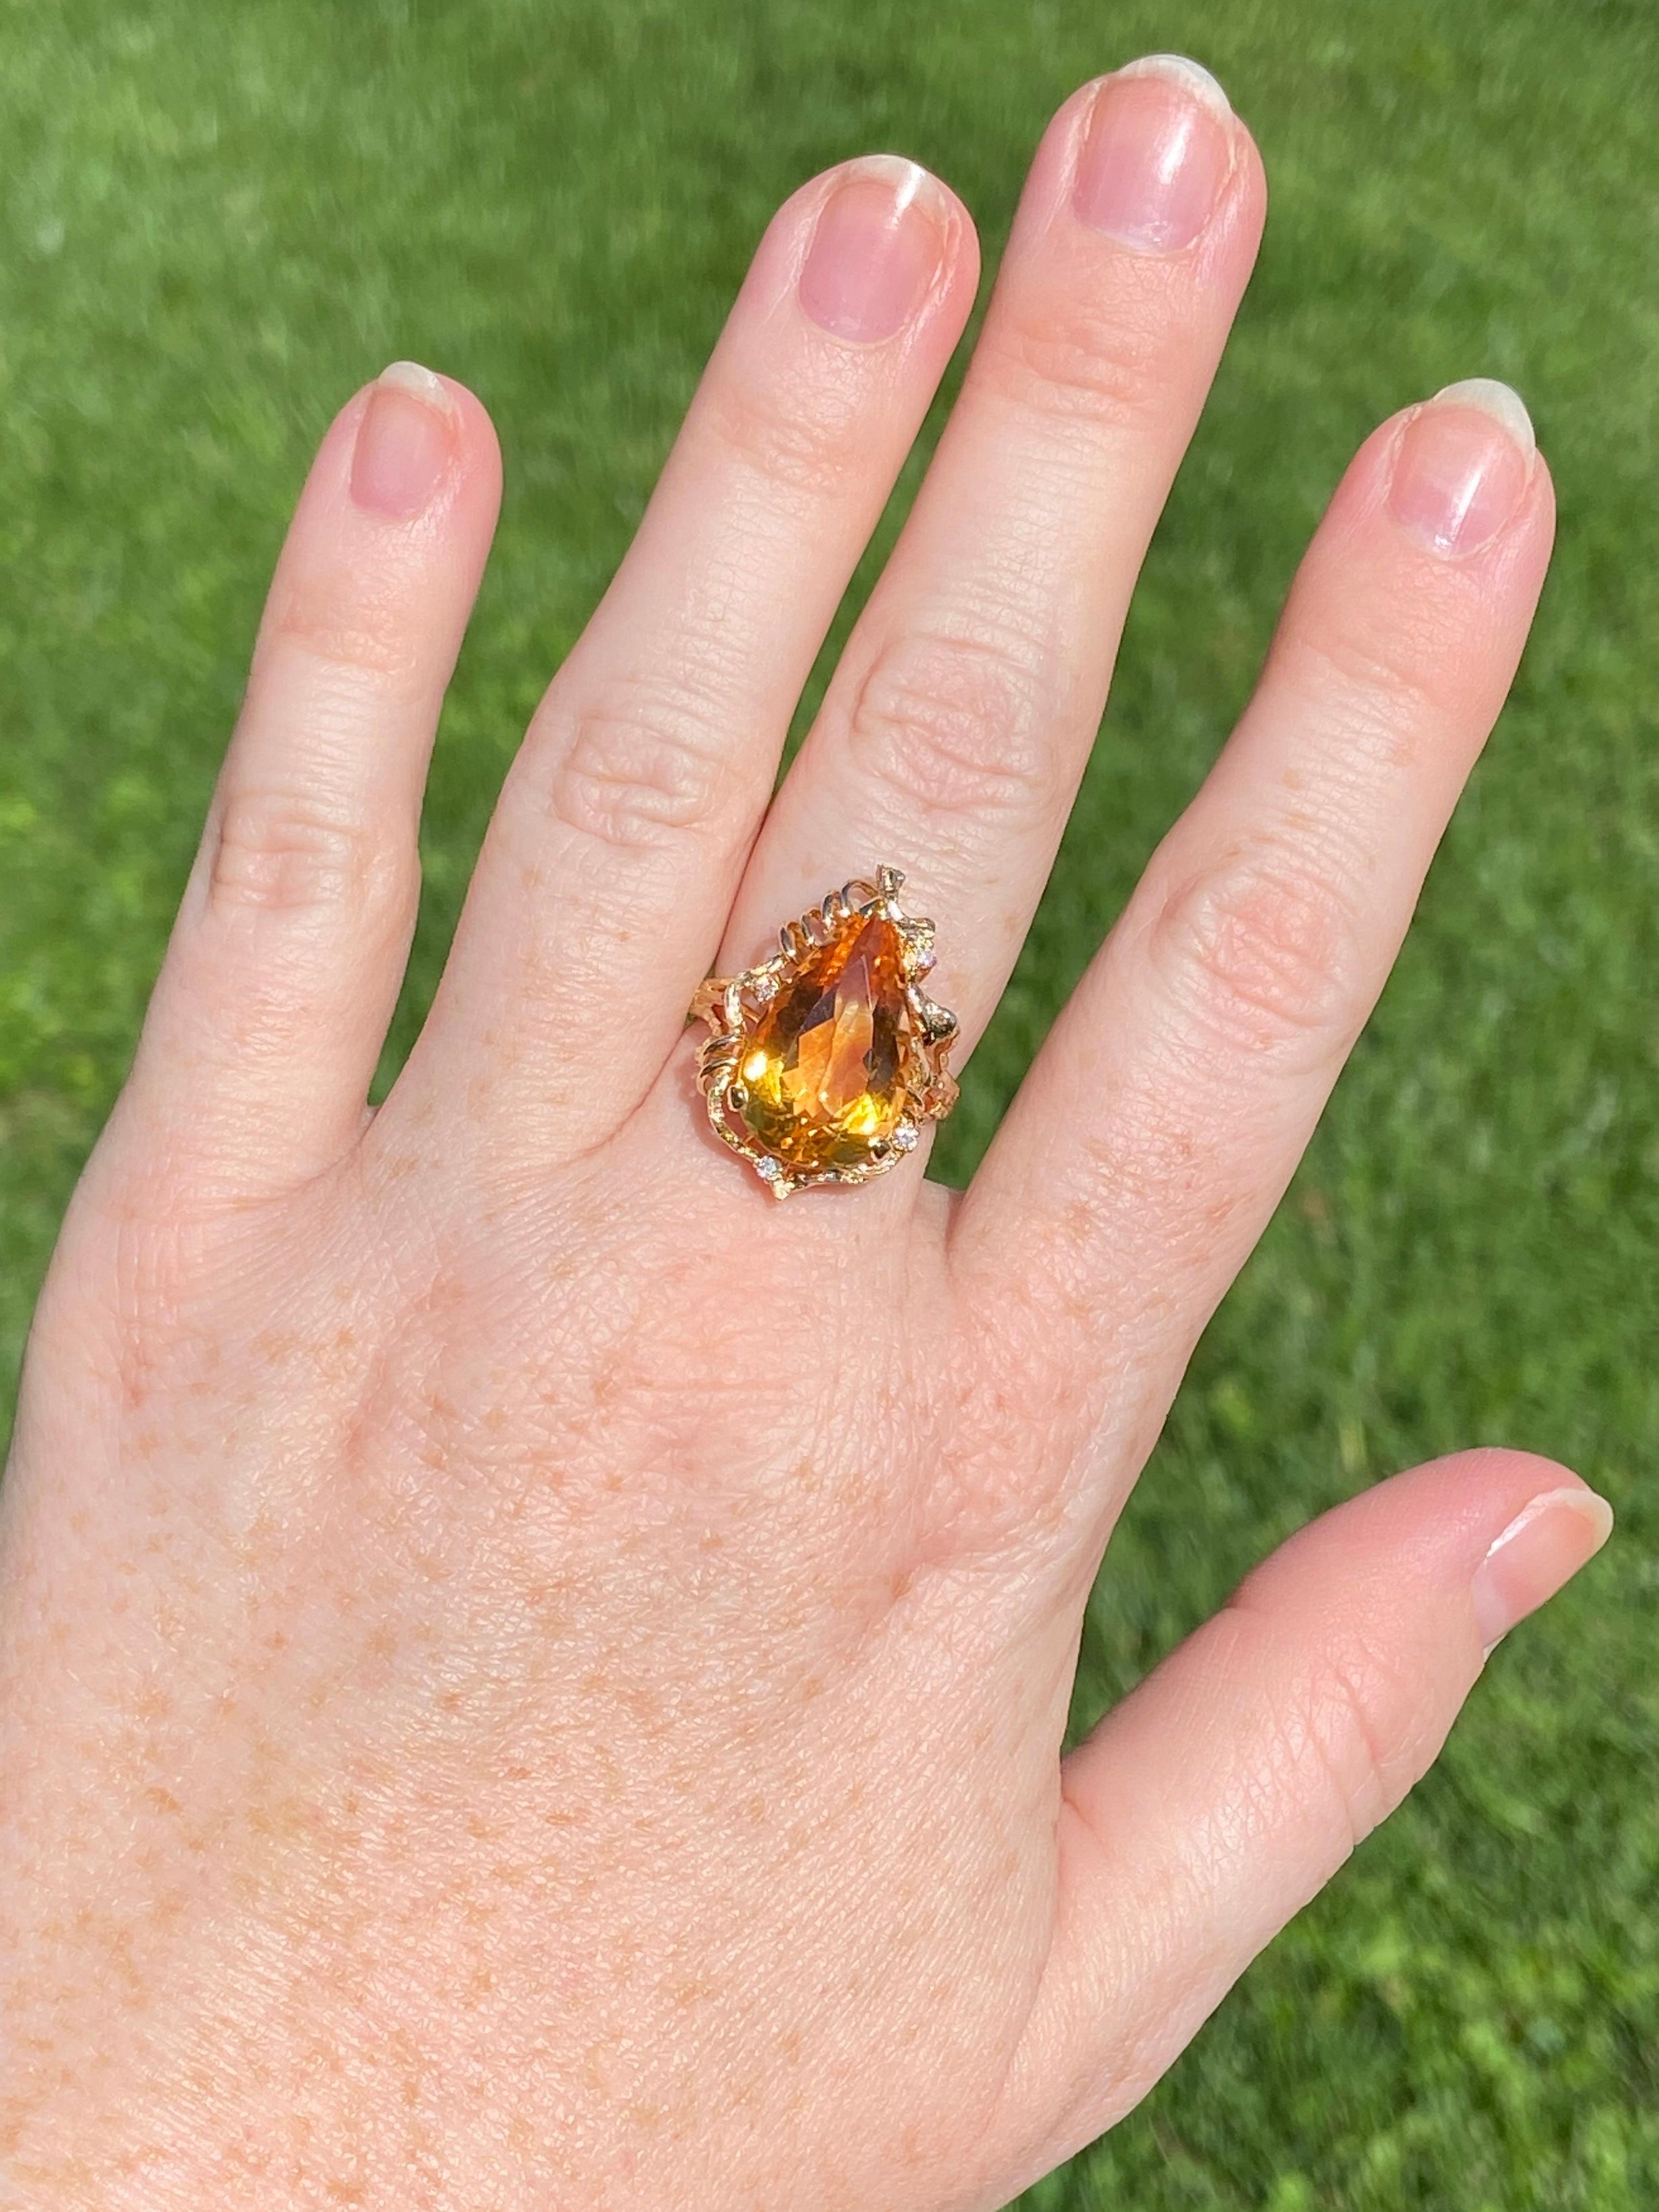 Like a perfect teardrop of sunshine for the finger, this citrine has the perfect yellow-orange golden hue. As your move your hand, you'll see intensely saturated flashes of both golden yellow and orange. The asymmetrical organic setting, typical of